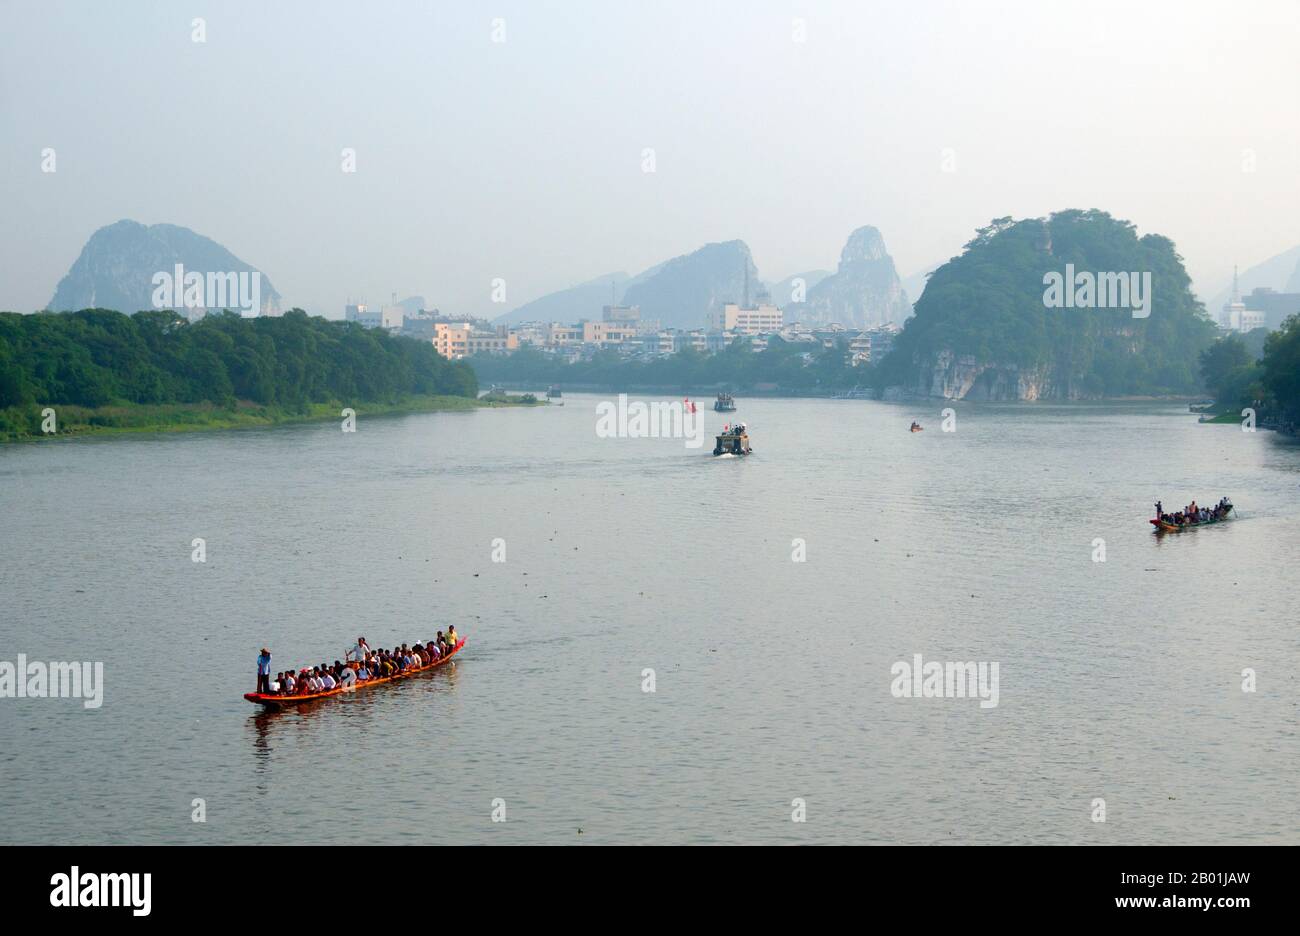 China: Dragon boats on the Li River, Guilin, Guangxi Province.  Guilin's Dragon Boat Festival is held on the fifth day of the fifth month (May) of the Chinese lunar calendar every 3 years. The festival was originally held in memory of the great Chinese poet, Quyuan.  The name Guilin means ‘Cassia Woods’ and is named after the osmanthus (cassia) blossoms that bloom throughout the autumn period.  Guilin is the scene of China’s most famous landscapes, inspiring thousands of paintings over many centuries. Stock Photo